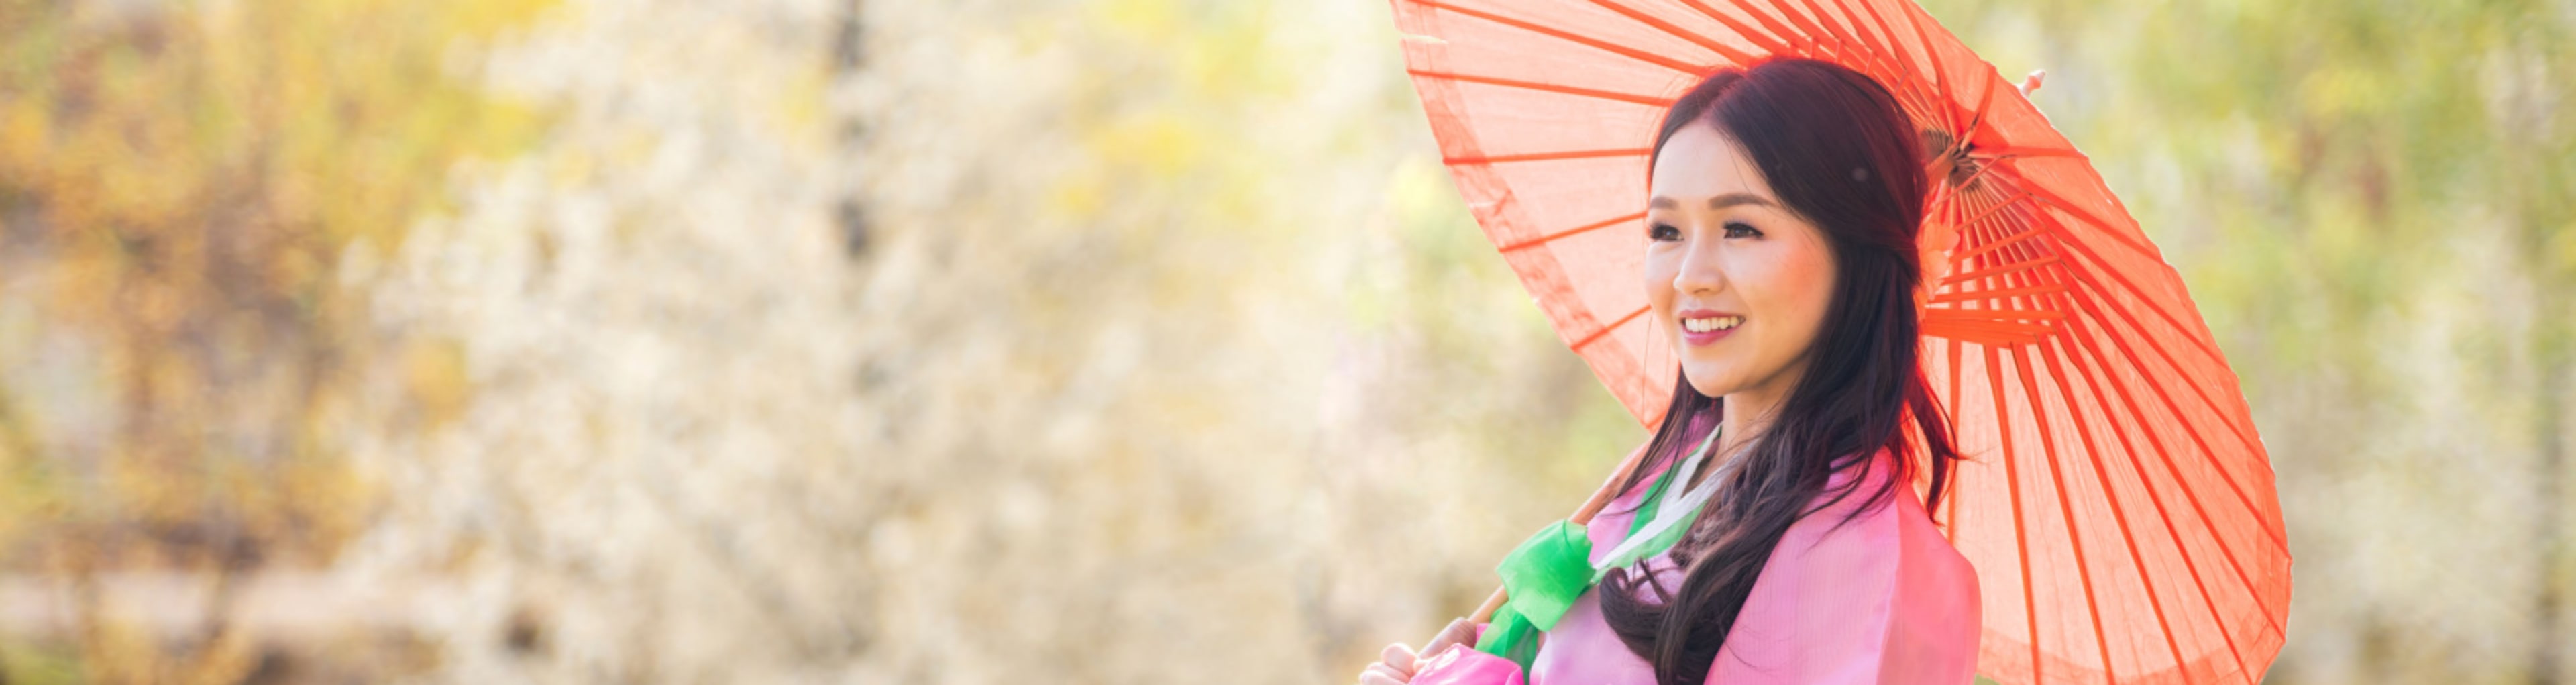 A woman in traditional dress with a parasol, near cherry blossoms in Seoul